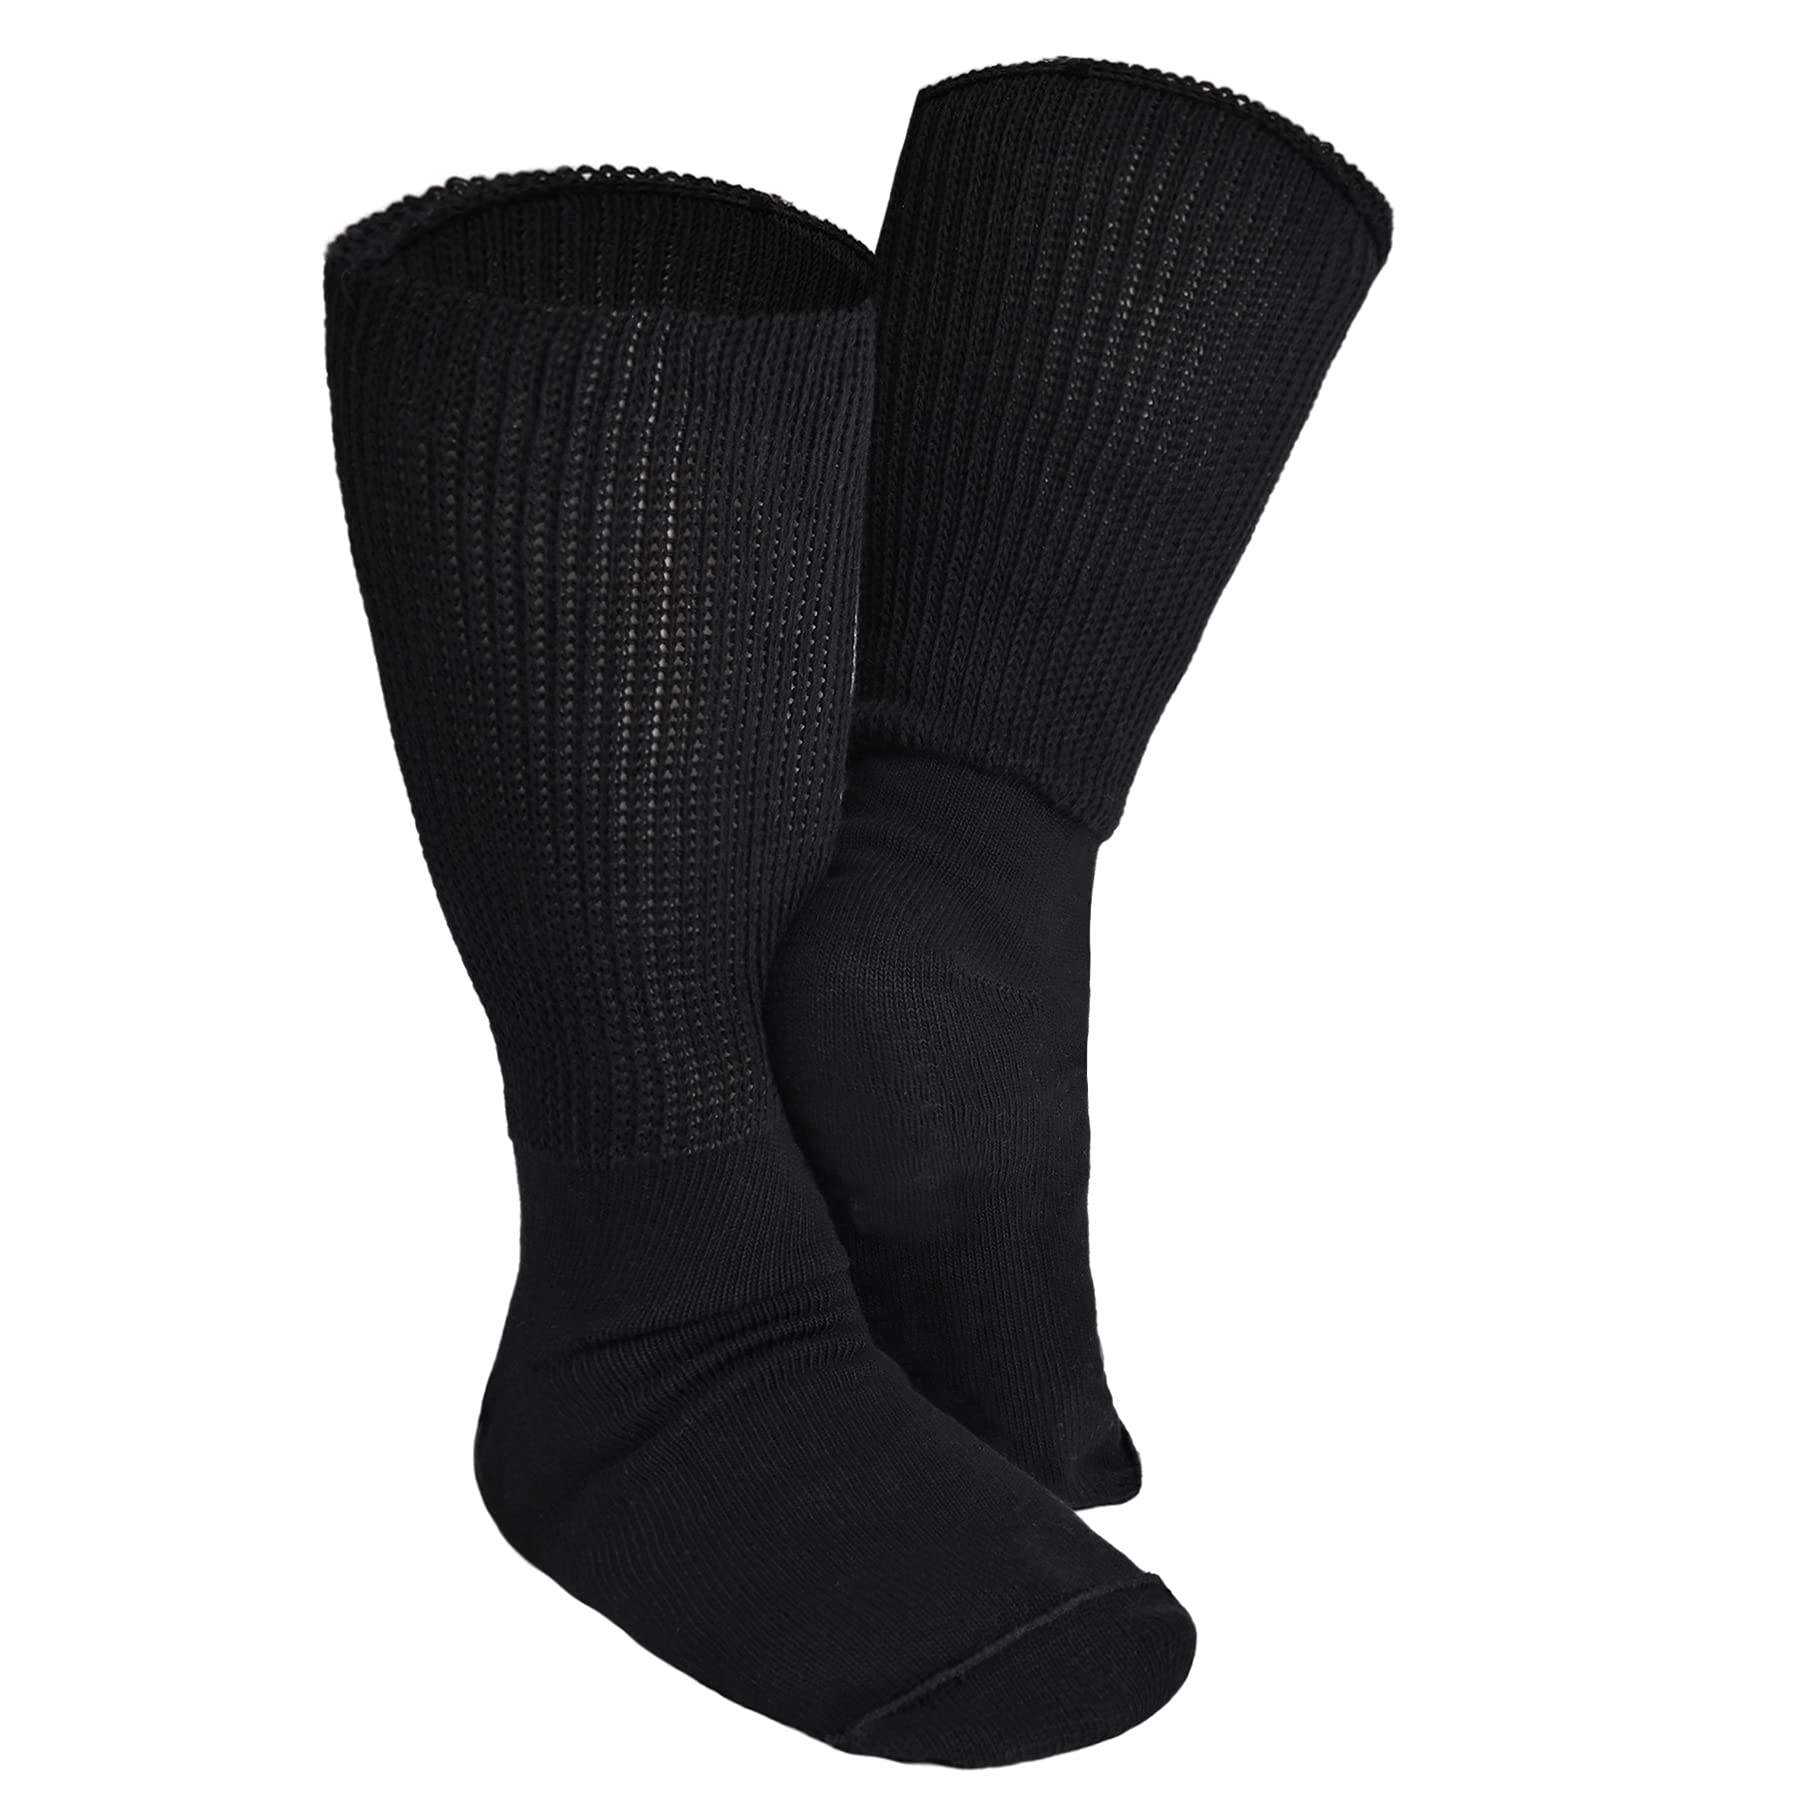 2 Pack - Extra Wide Edema Diabetic Socks for Men and Women